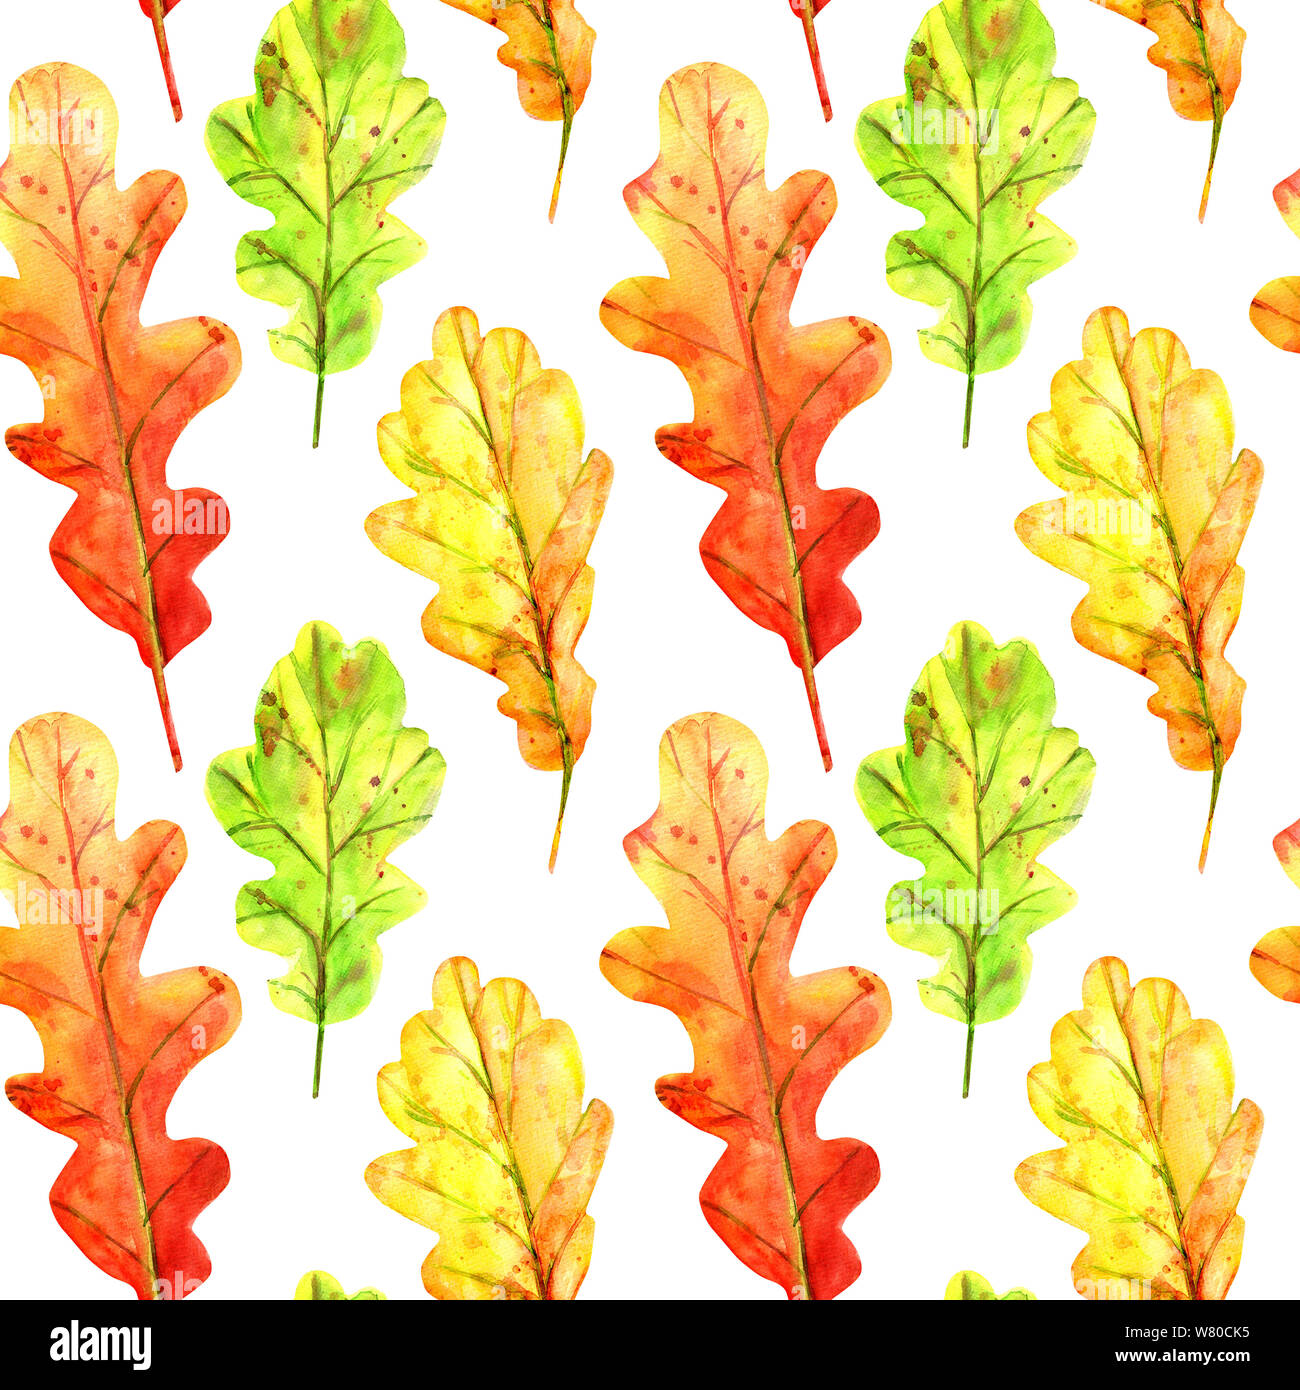 Seamless pattern with autumn oak leaves. Watercolor fallen leaves of green, orange and red with colorful drops and splashes on a white background. Tem Stock Photo